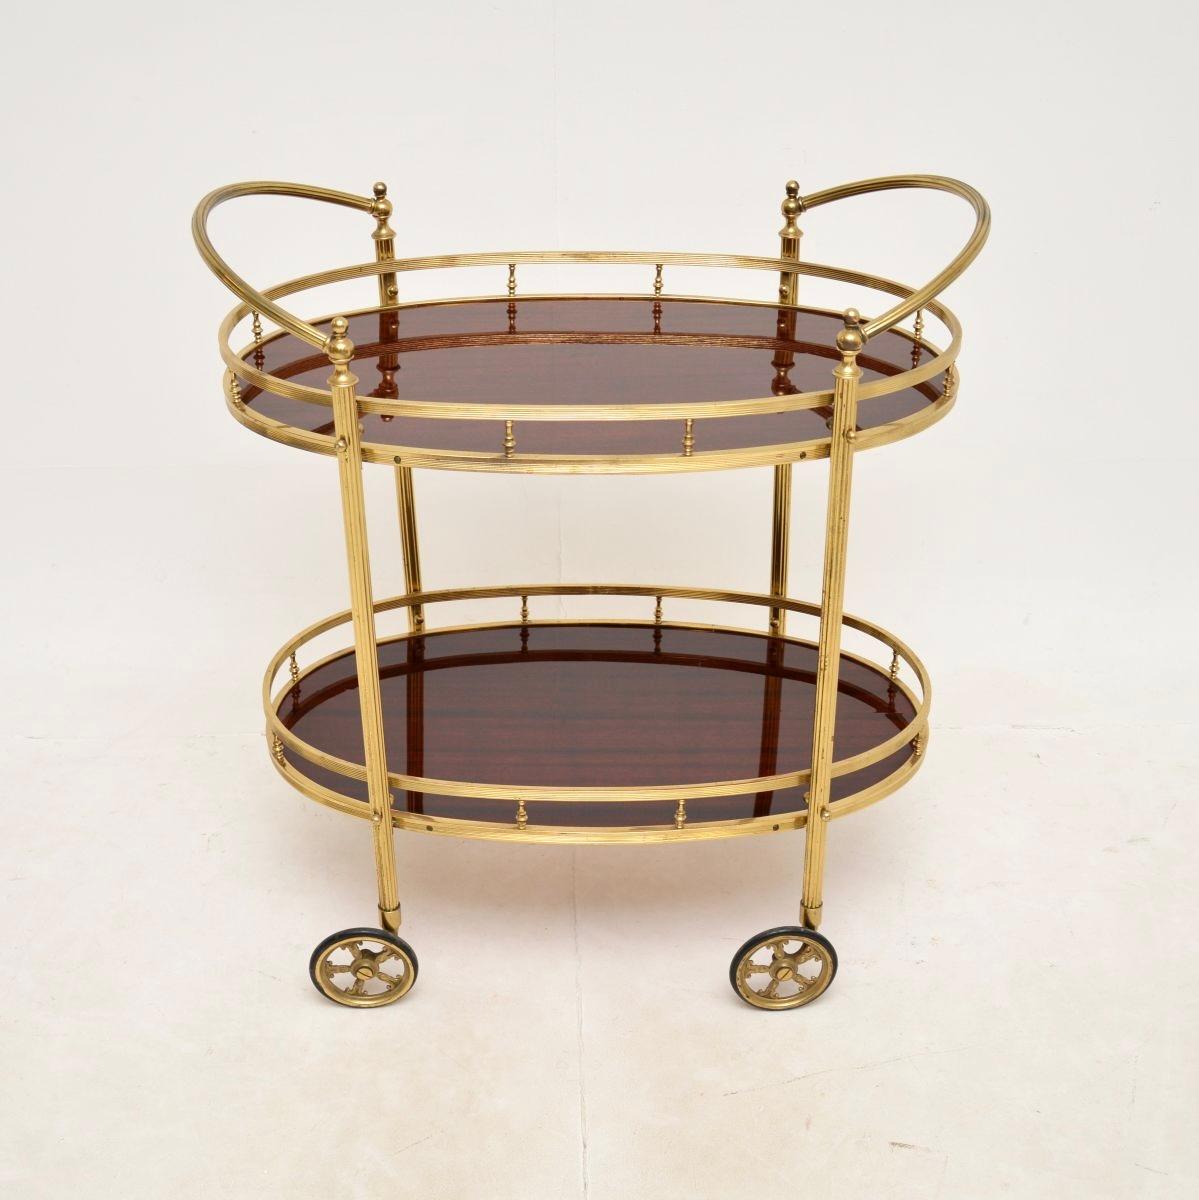 A fabulous vintage French brass drinks trolley. This was recently imported from France, it dates from the 1970’s.

It is of superb quality, with a beautiful fluted legs with finials, galleries around the top and lower tiers and large sweeping